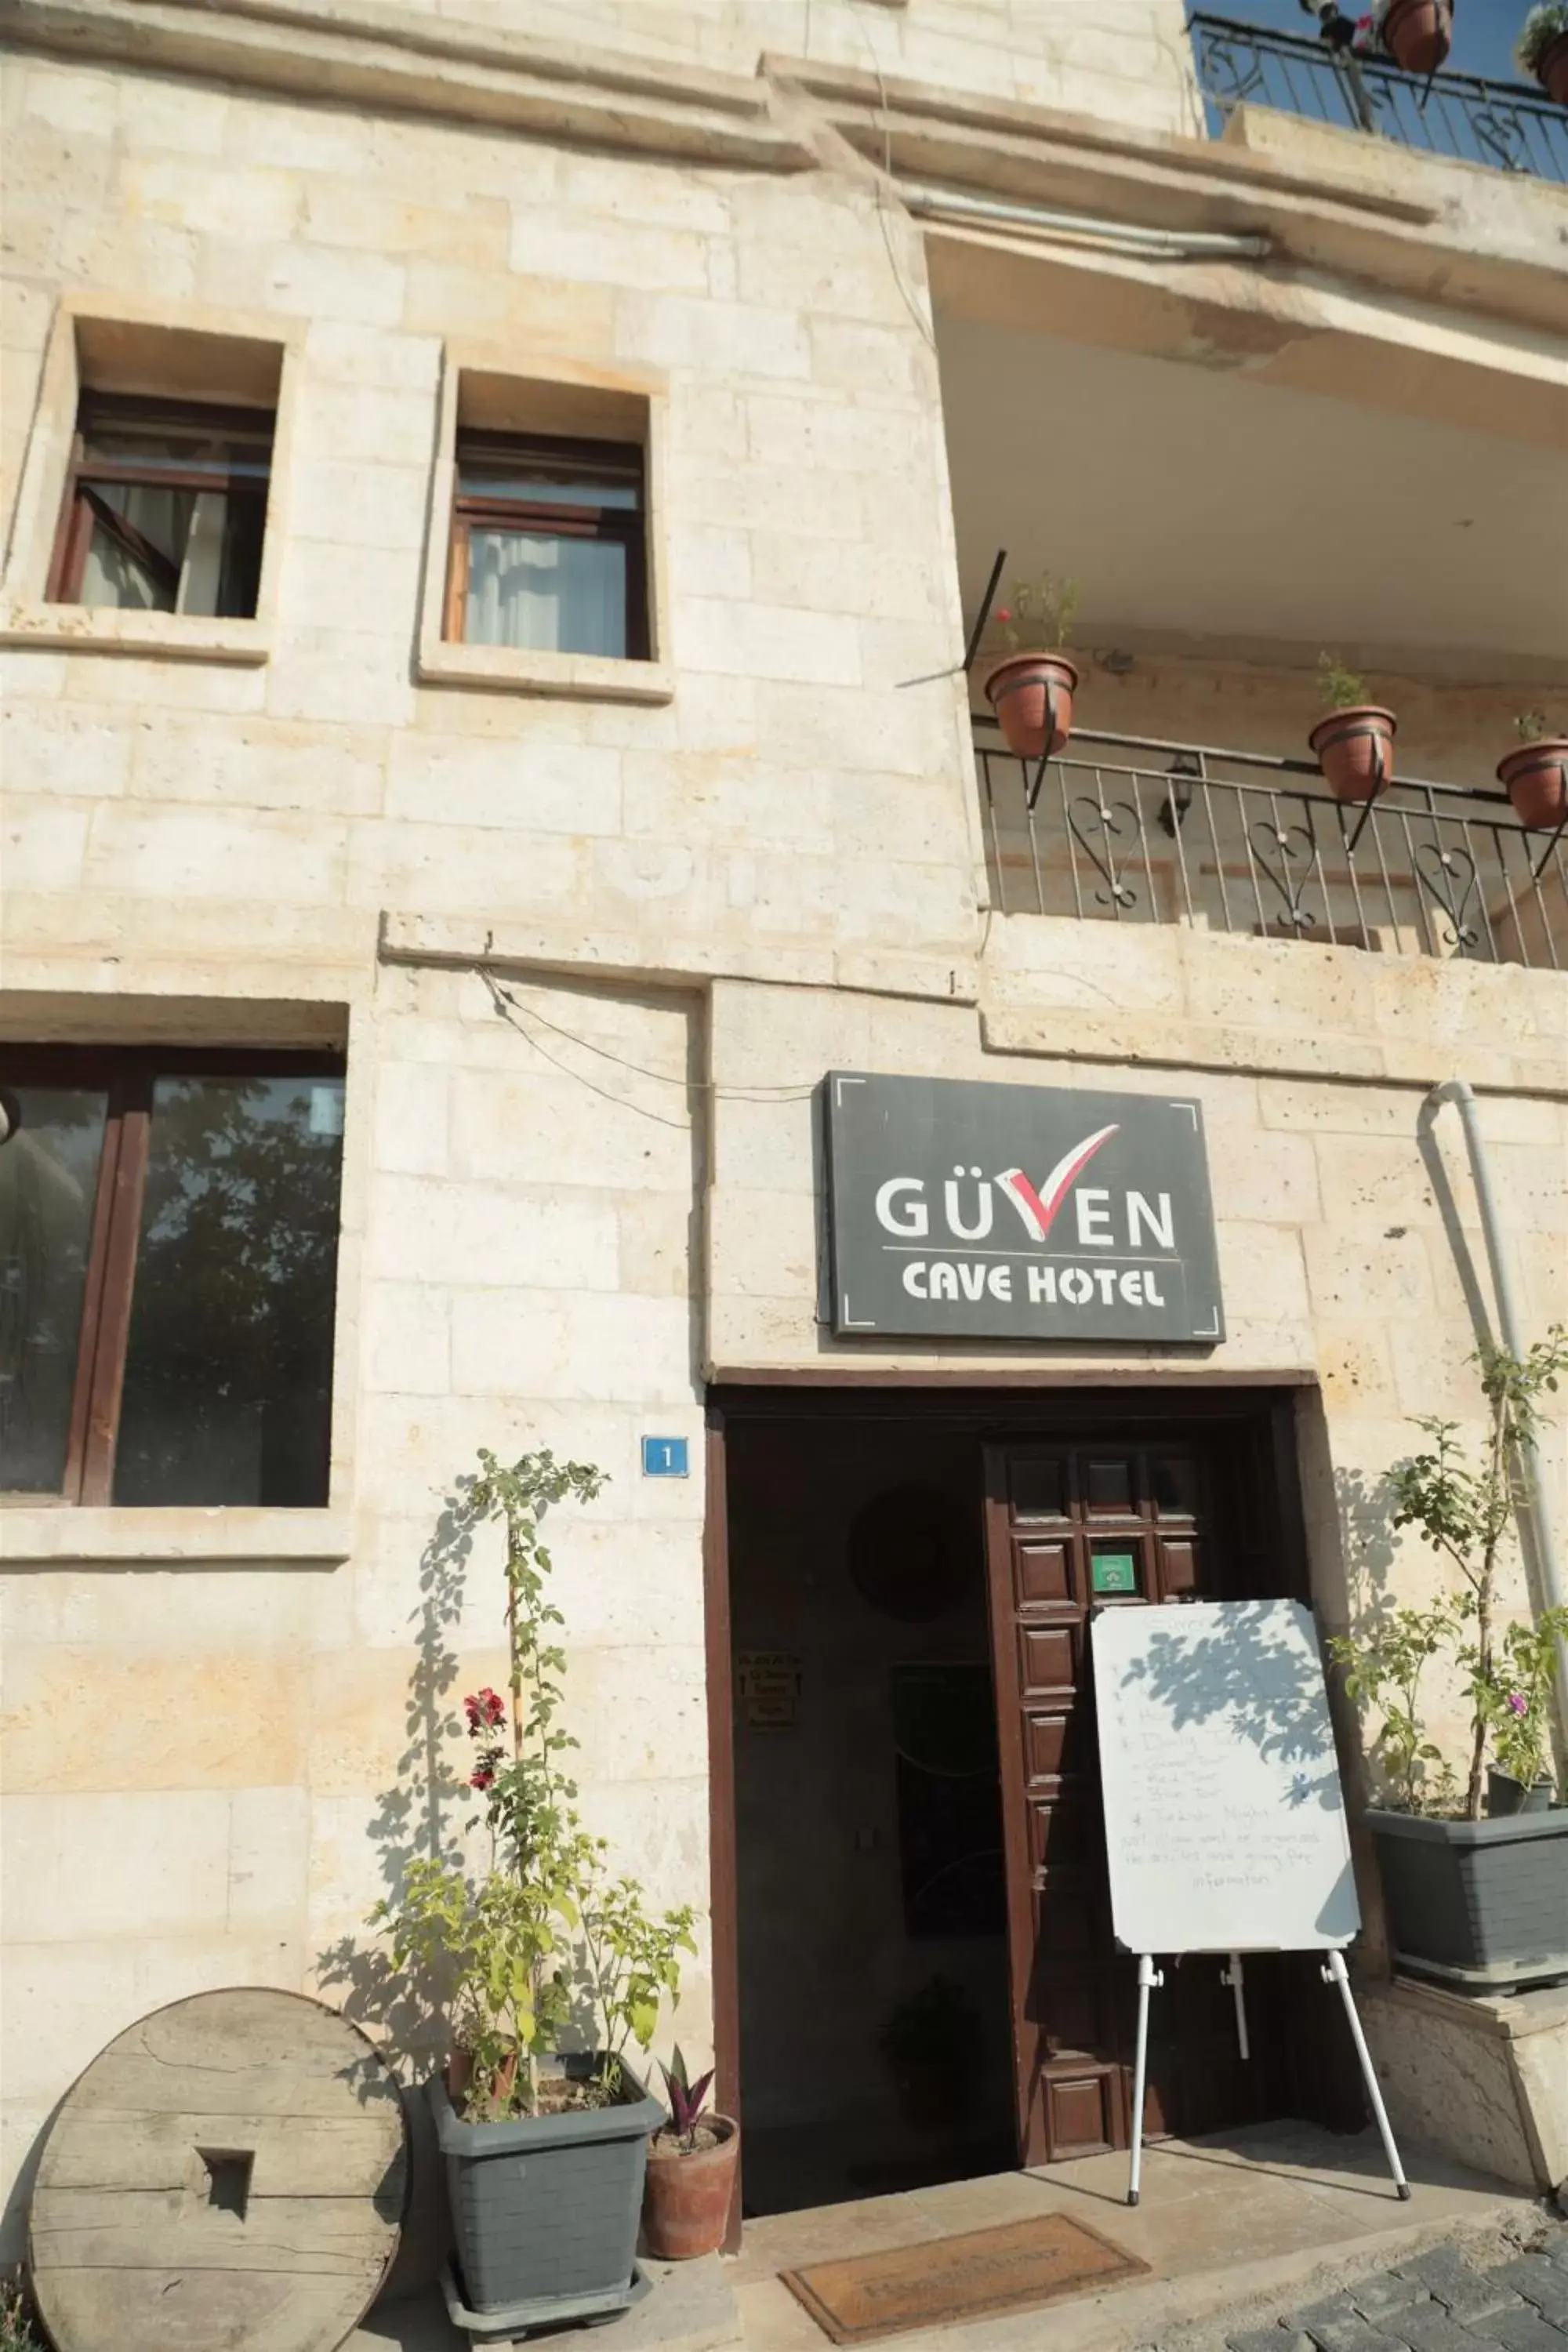 Property building in Guven Cave Hotel